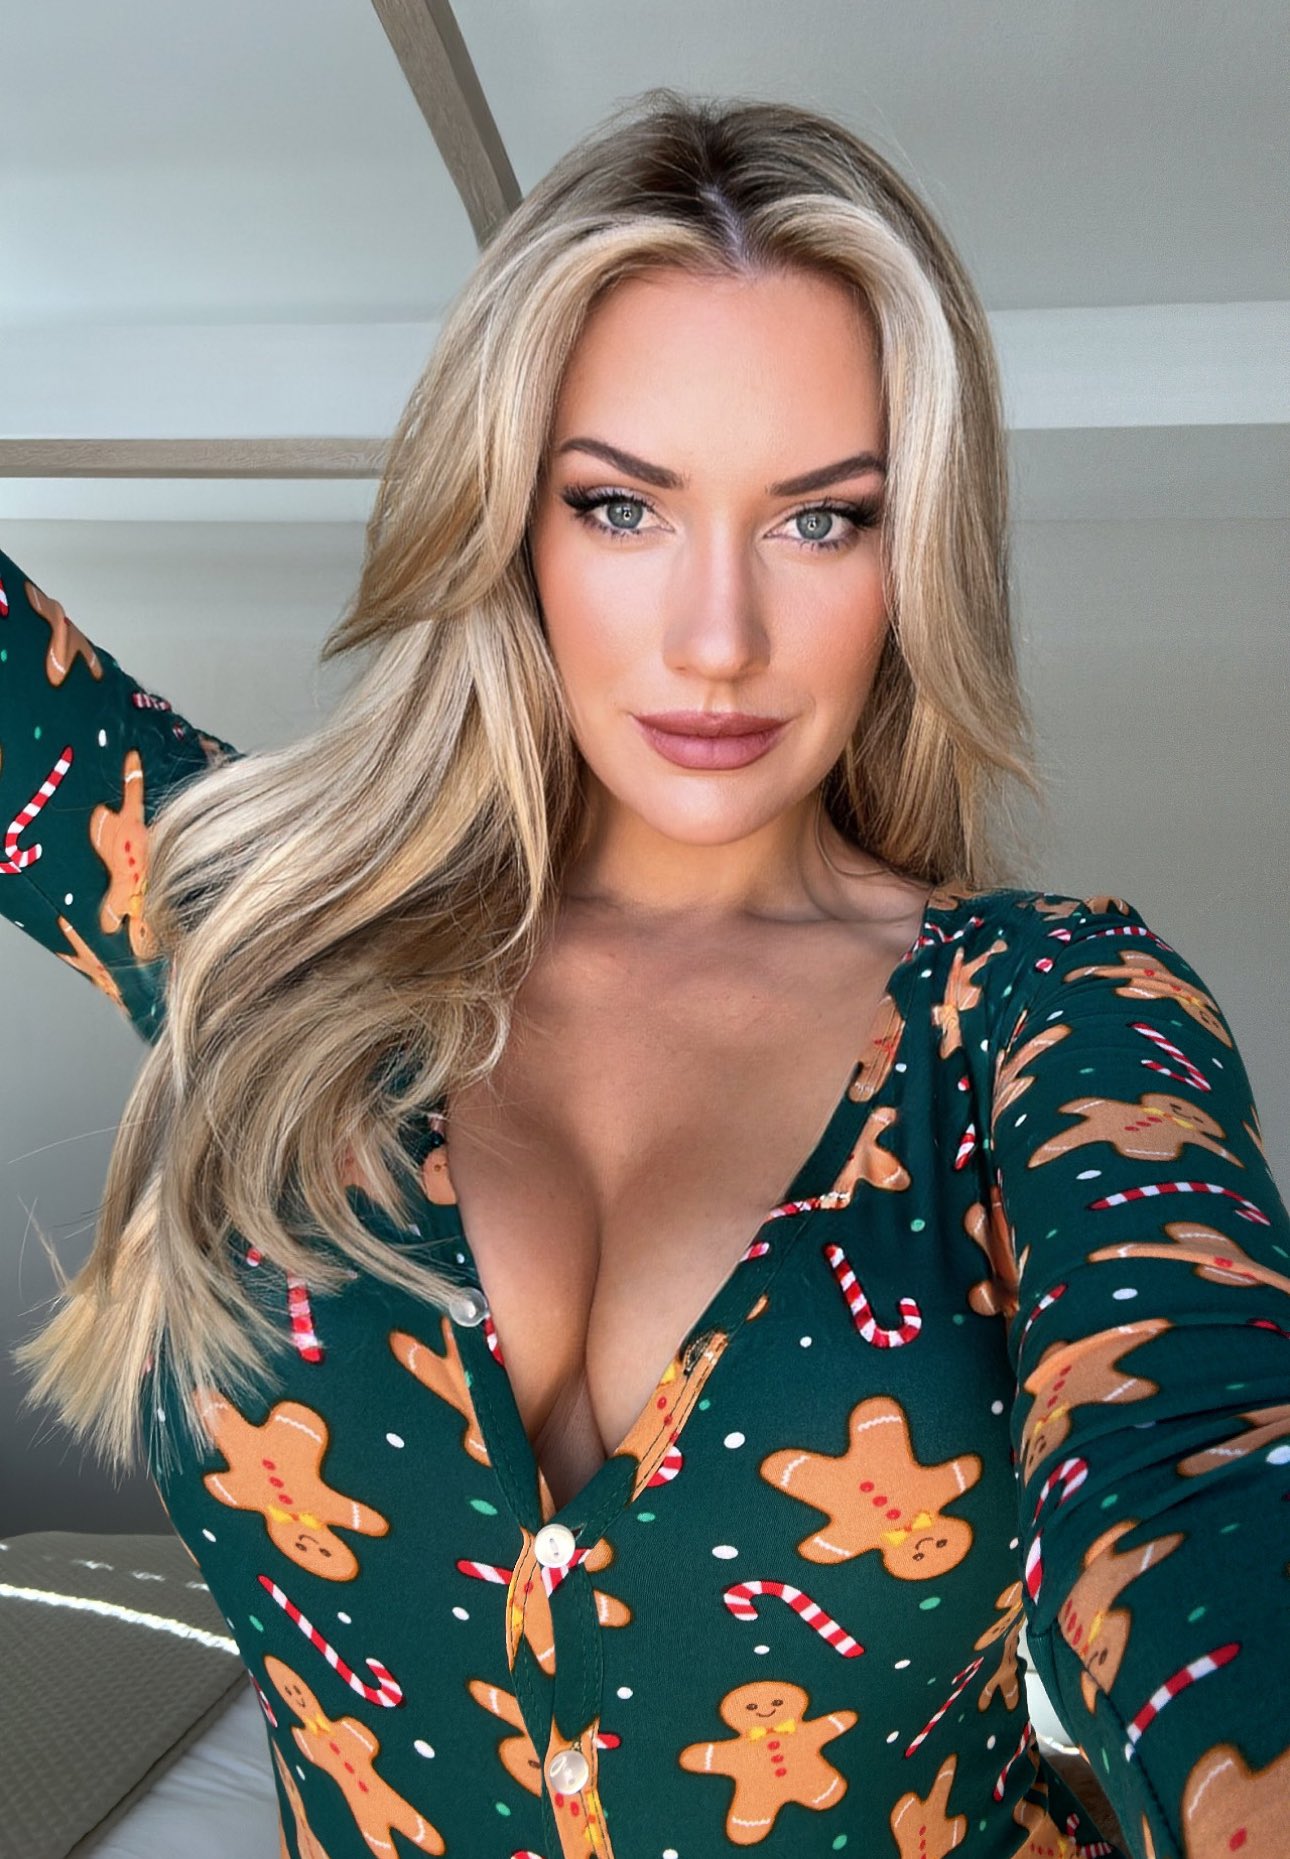 , Paige Spiranac stuns in low cut top and miniskirt as world’s sexiest woman gets back on the golf course